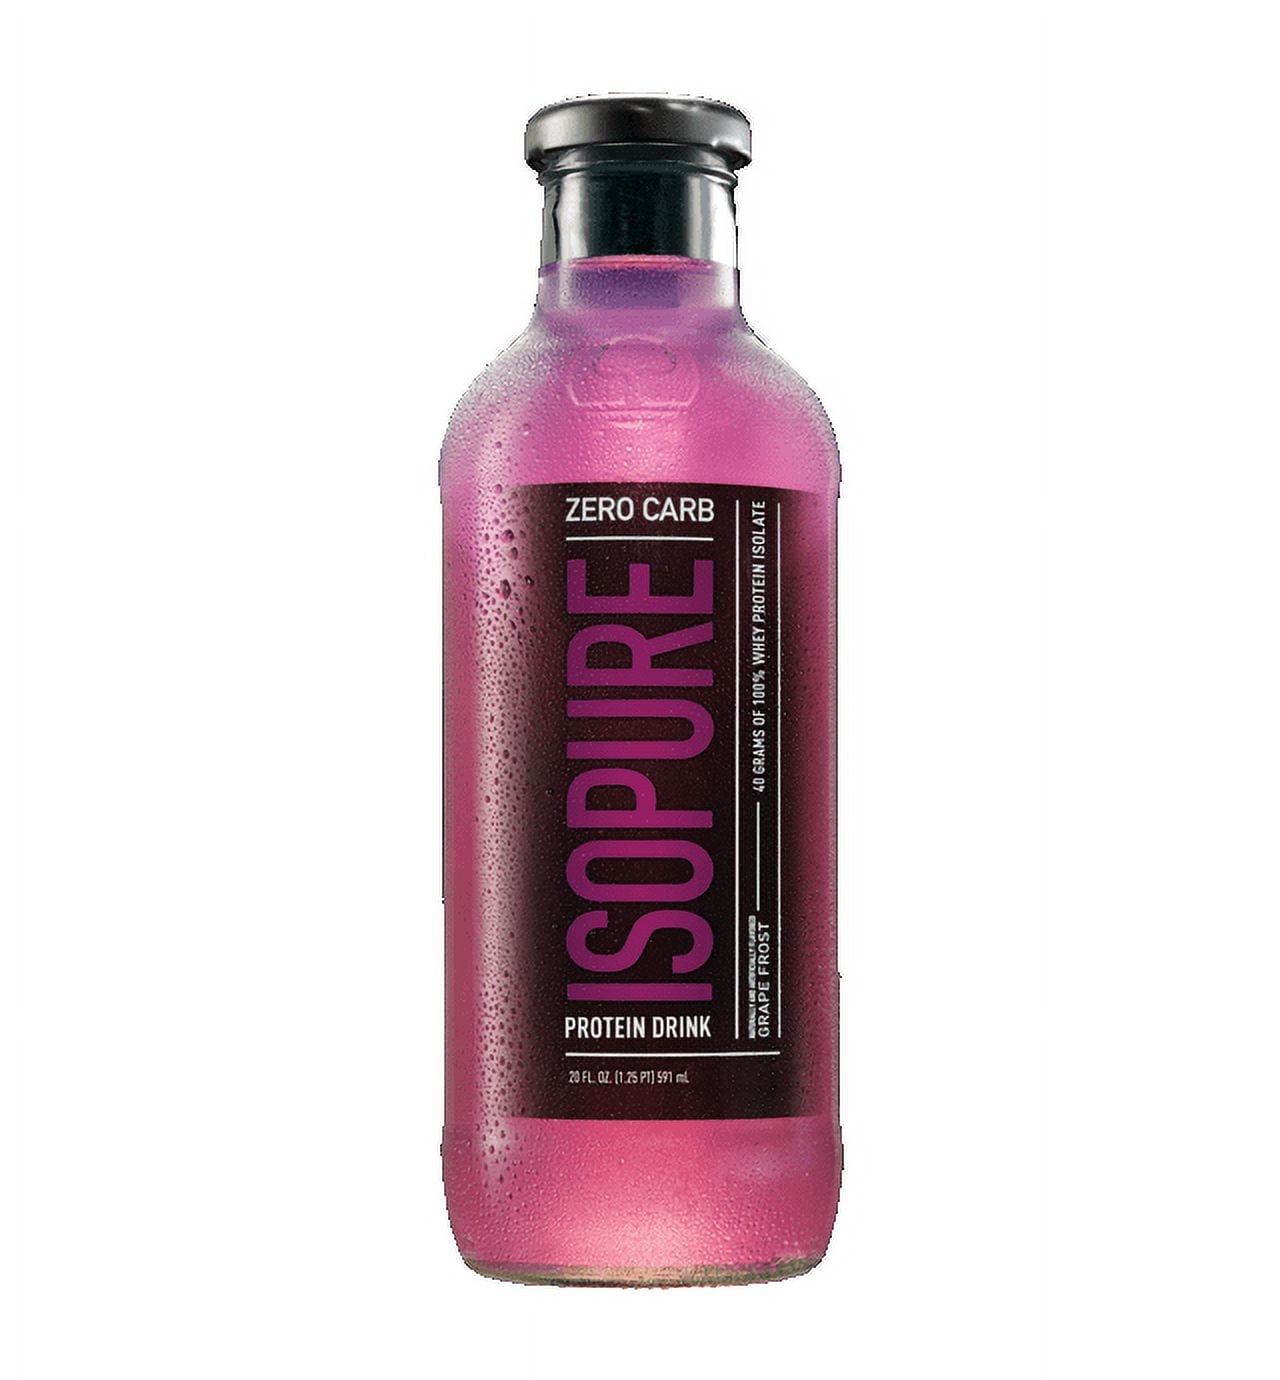 Isopure Zero Carb Protein Drink Review, Blue Raspberry